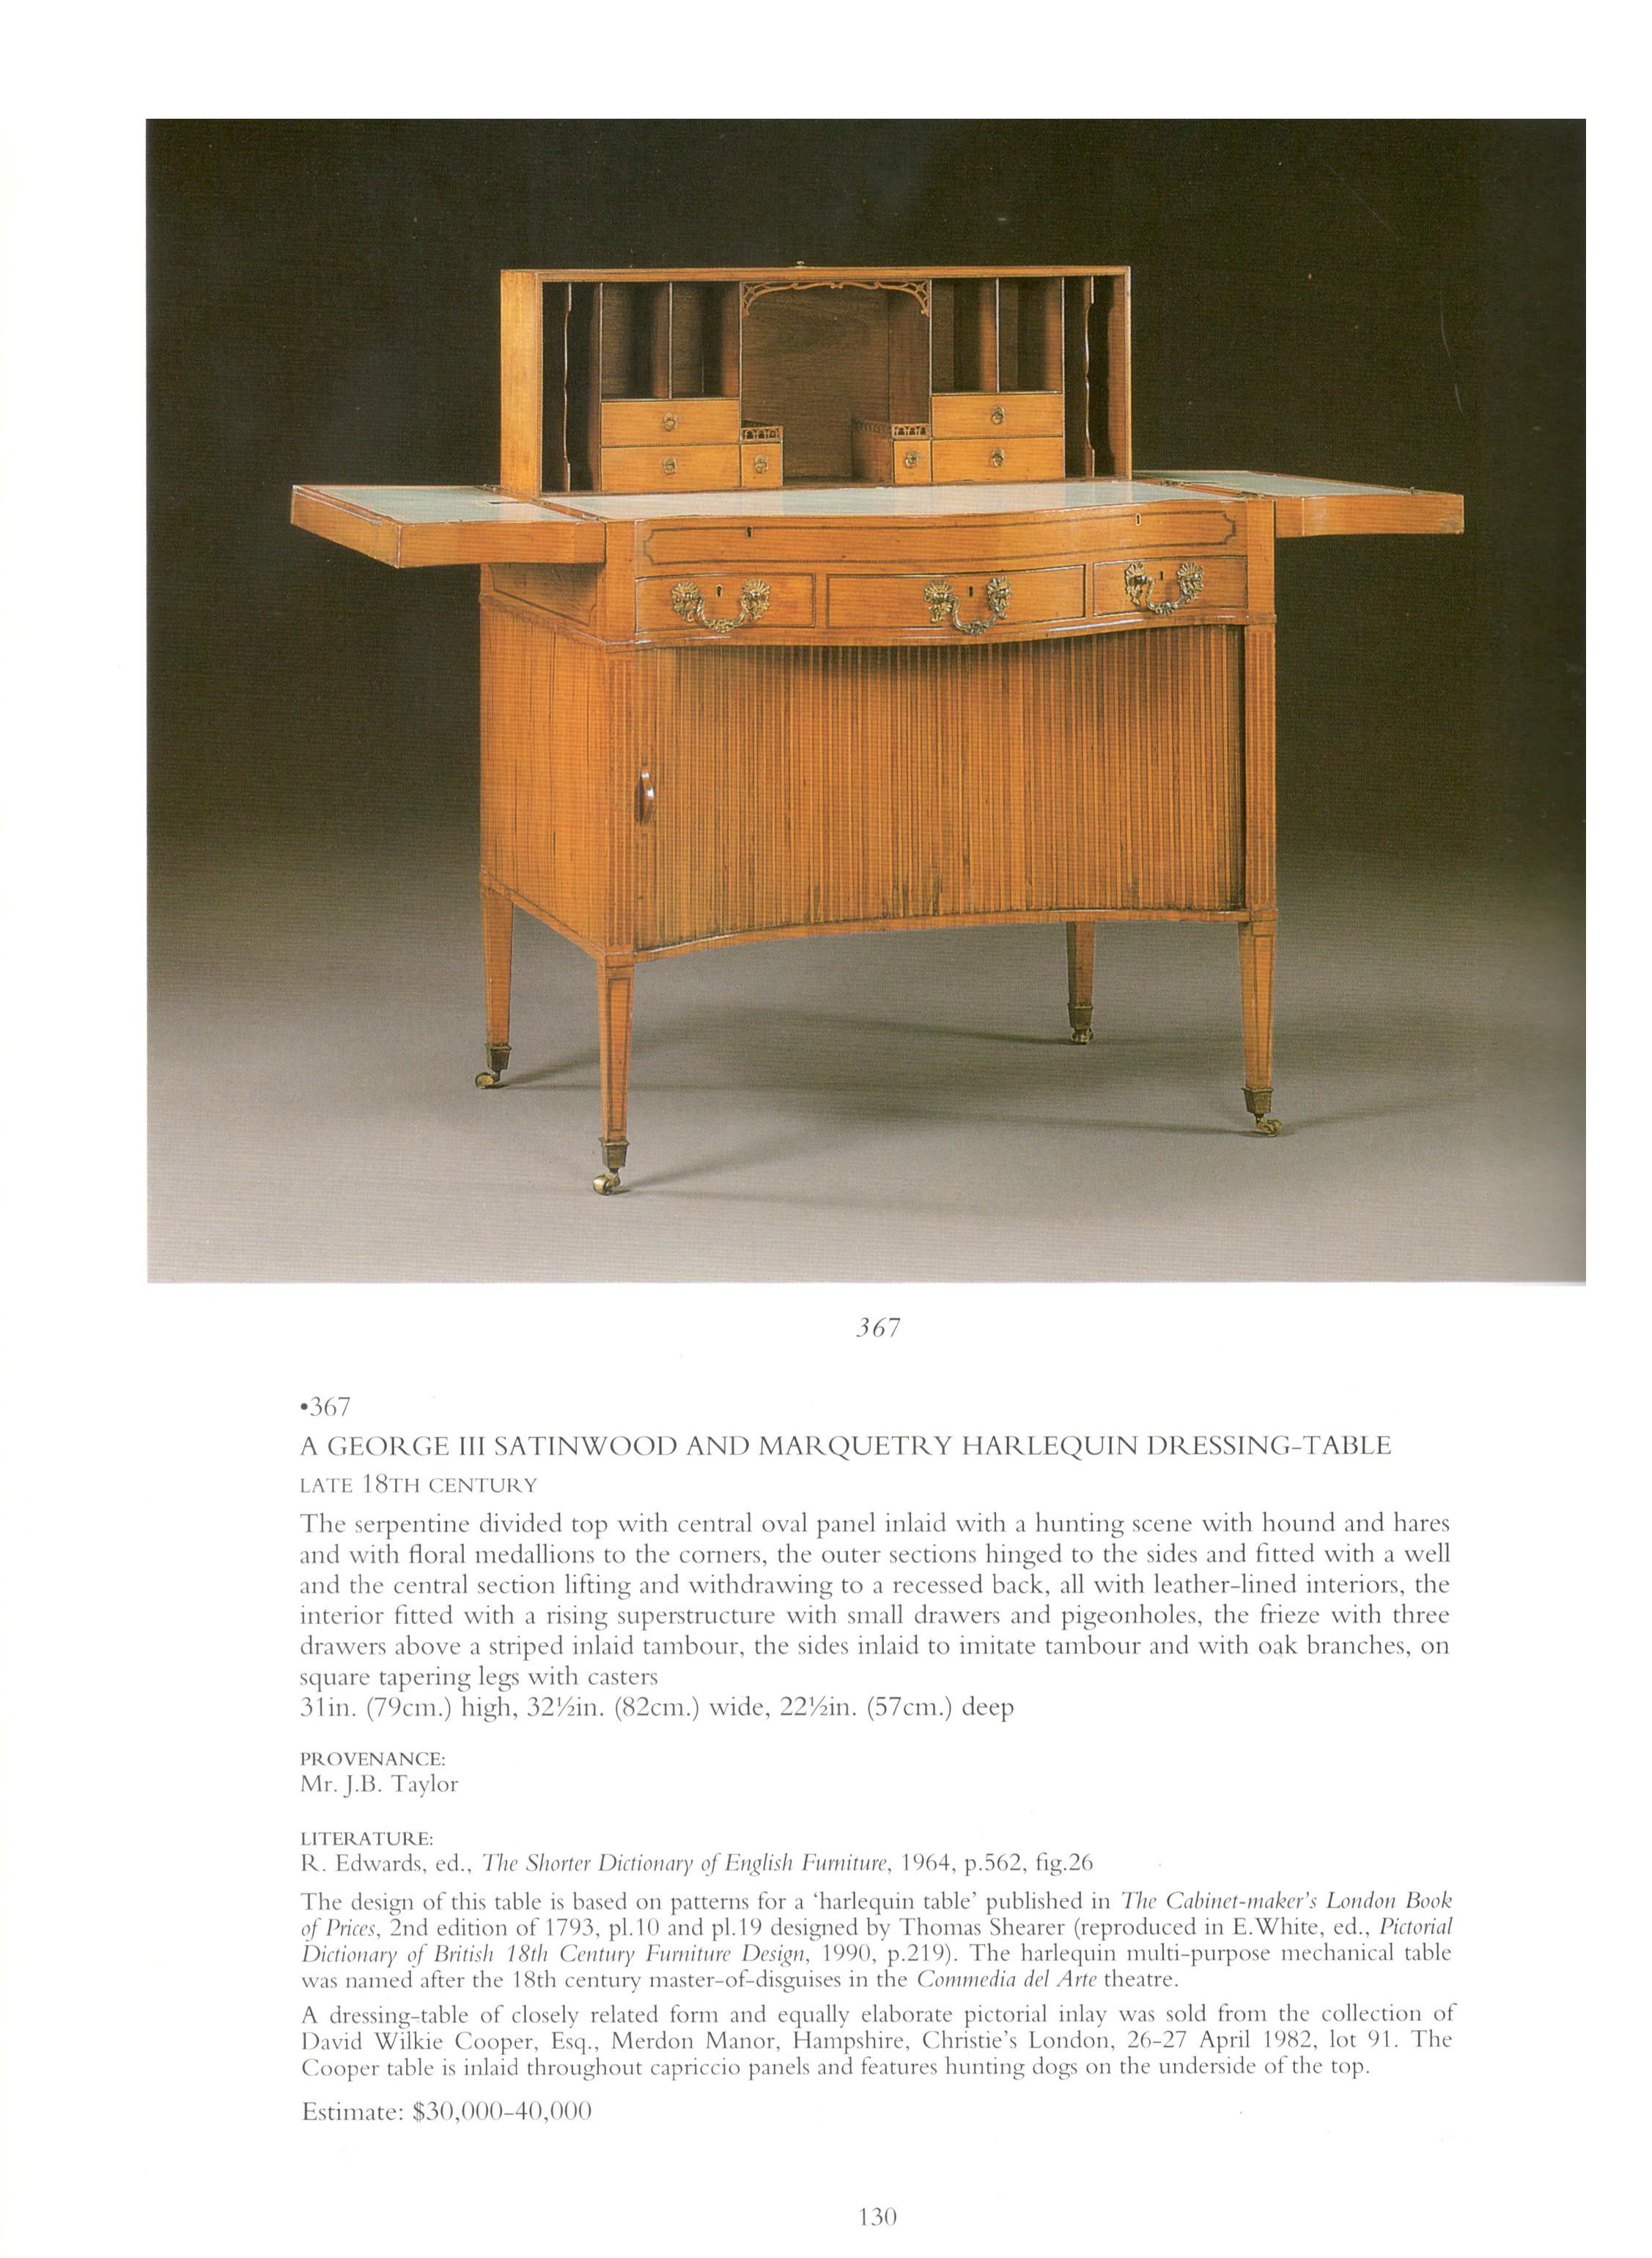 George III Satinwood and Marquetry Harlequin Writing Table For Sale 12